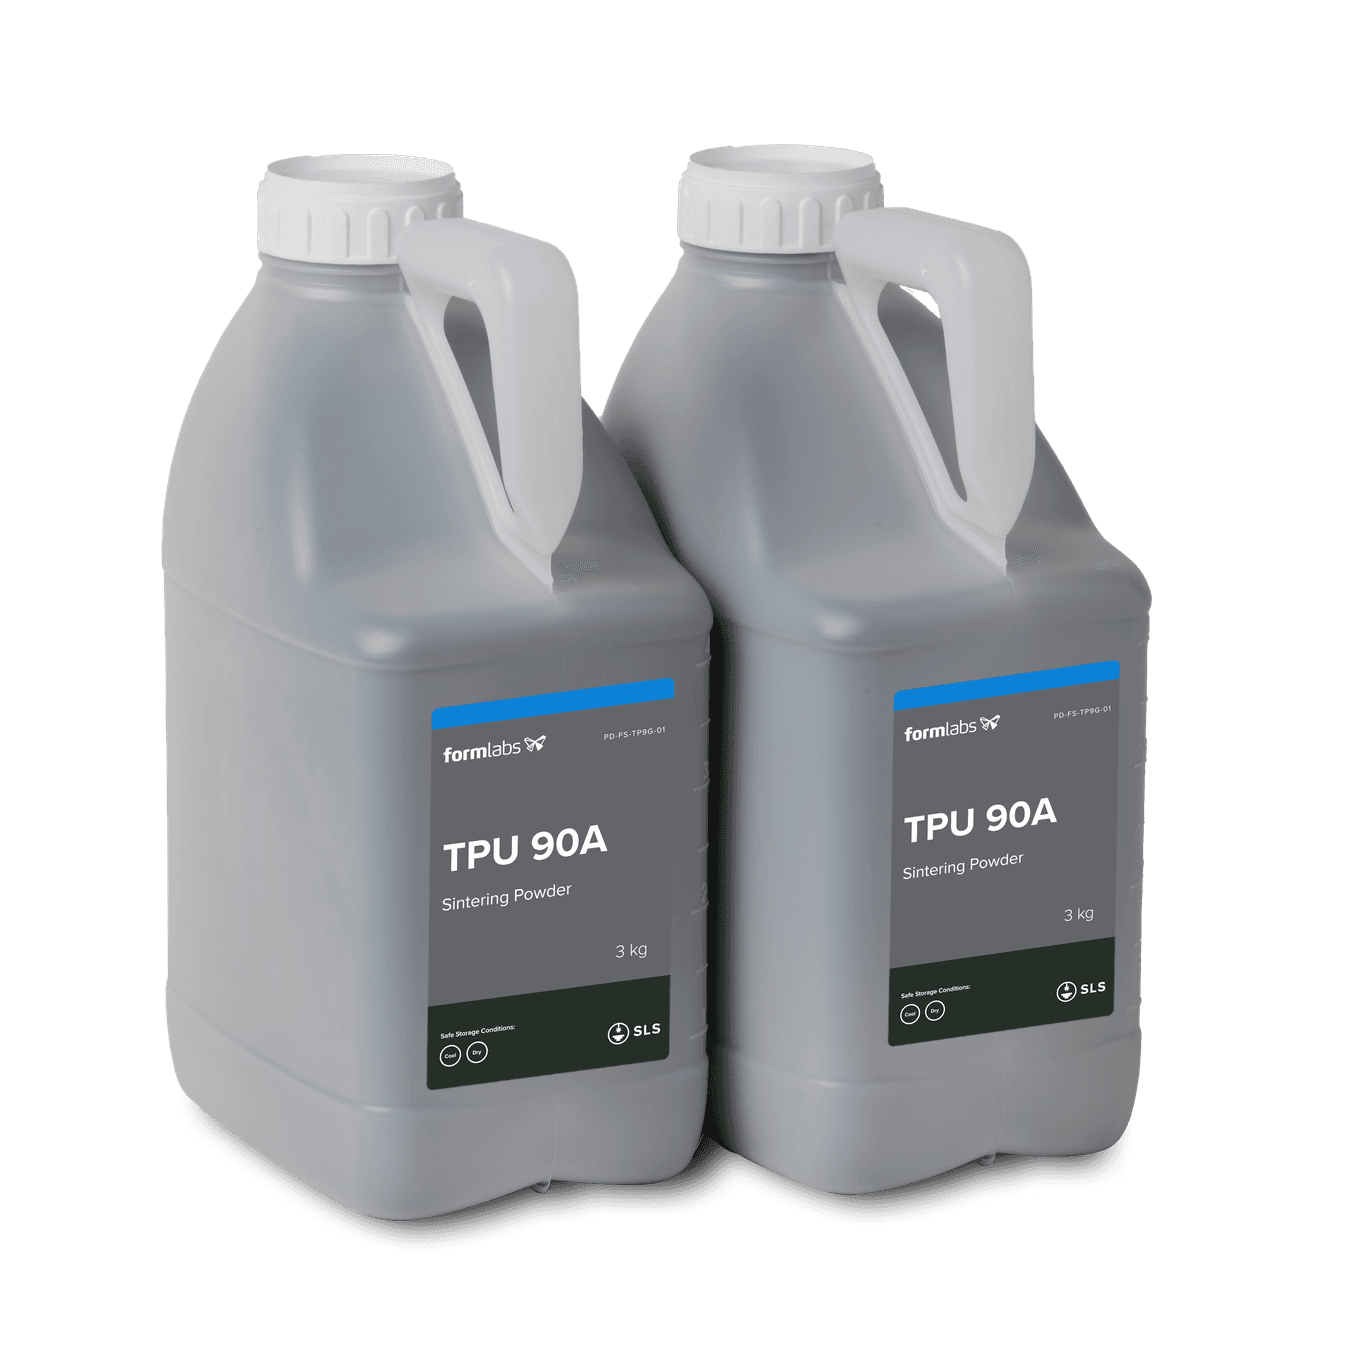 2 jugs of 3kg of TPU 90A Powder for the Fuse Series SLS 3D printer